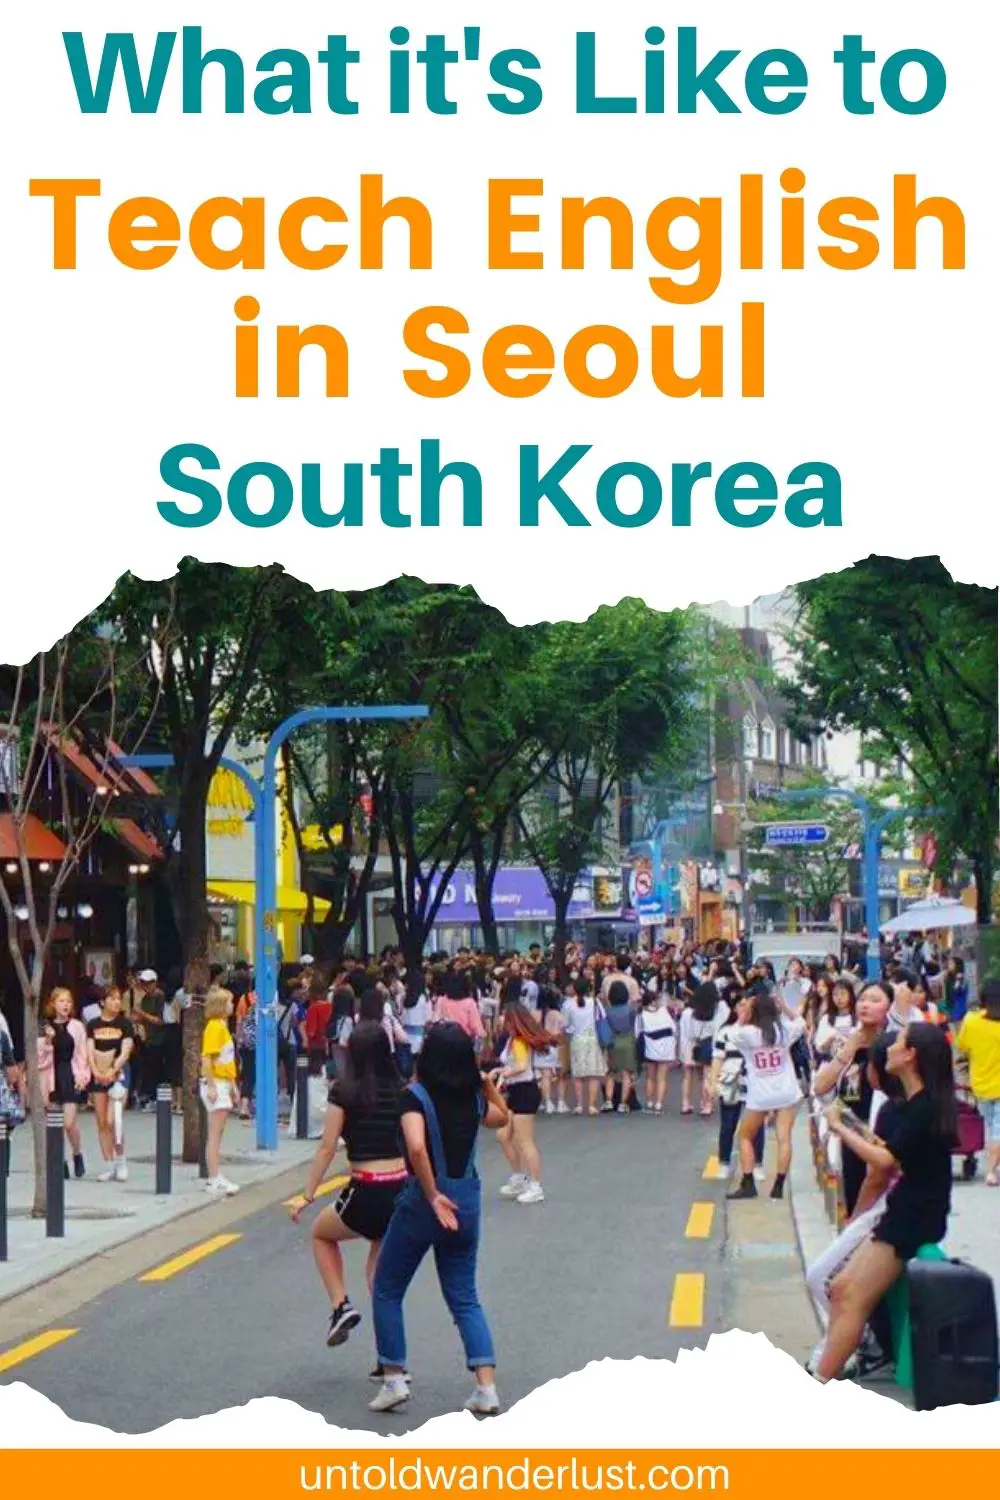 What it's like to teach English in Seoul, South Korea